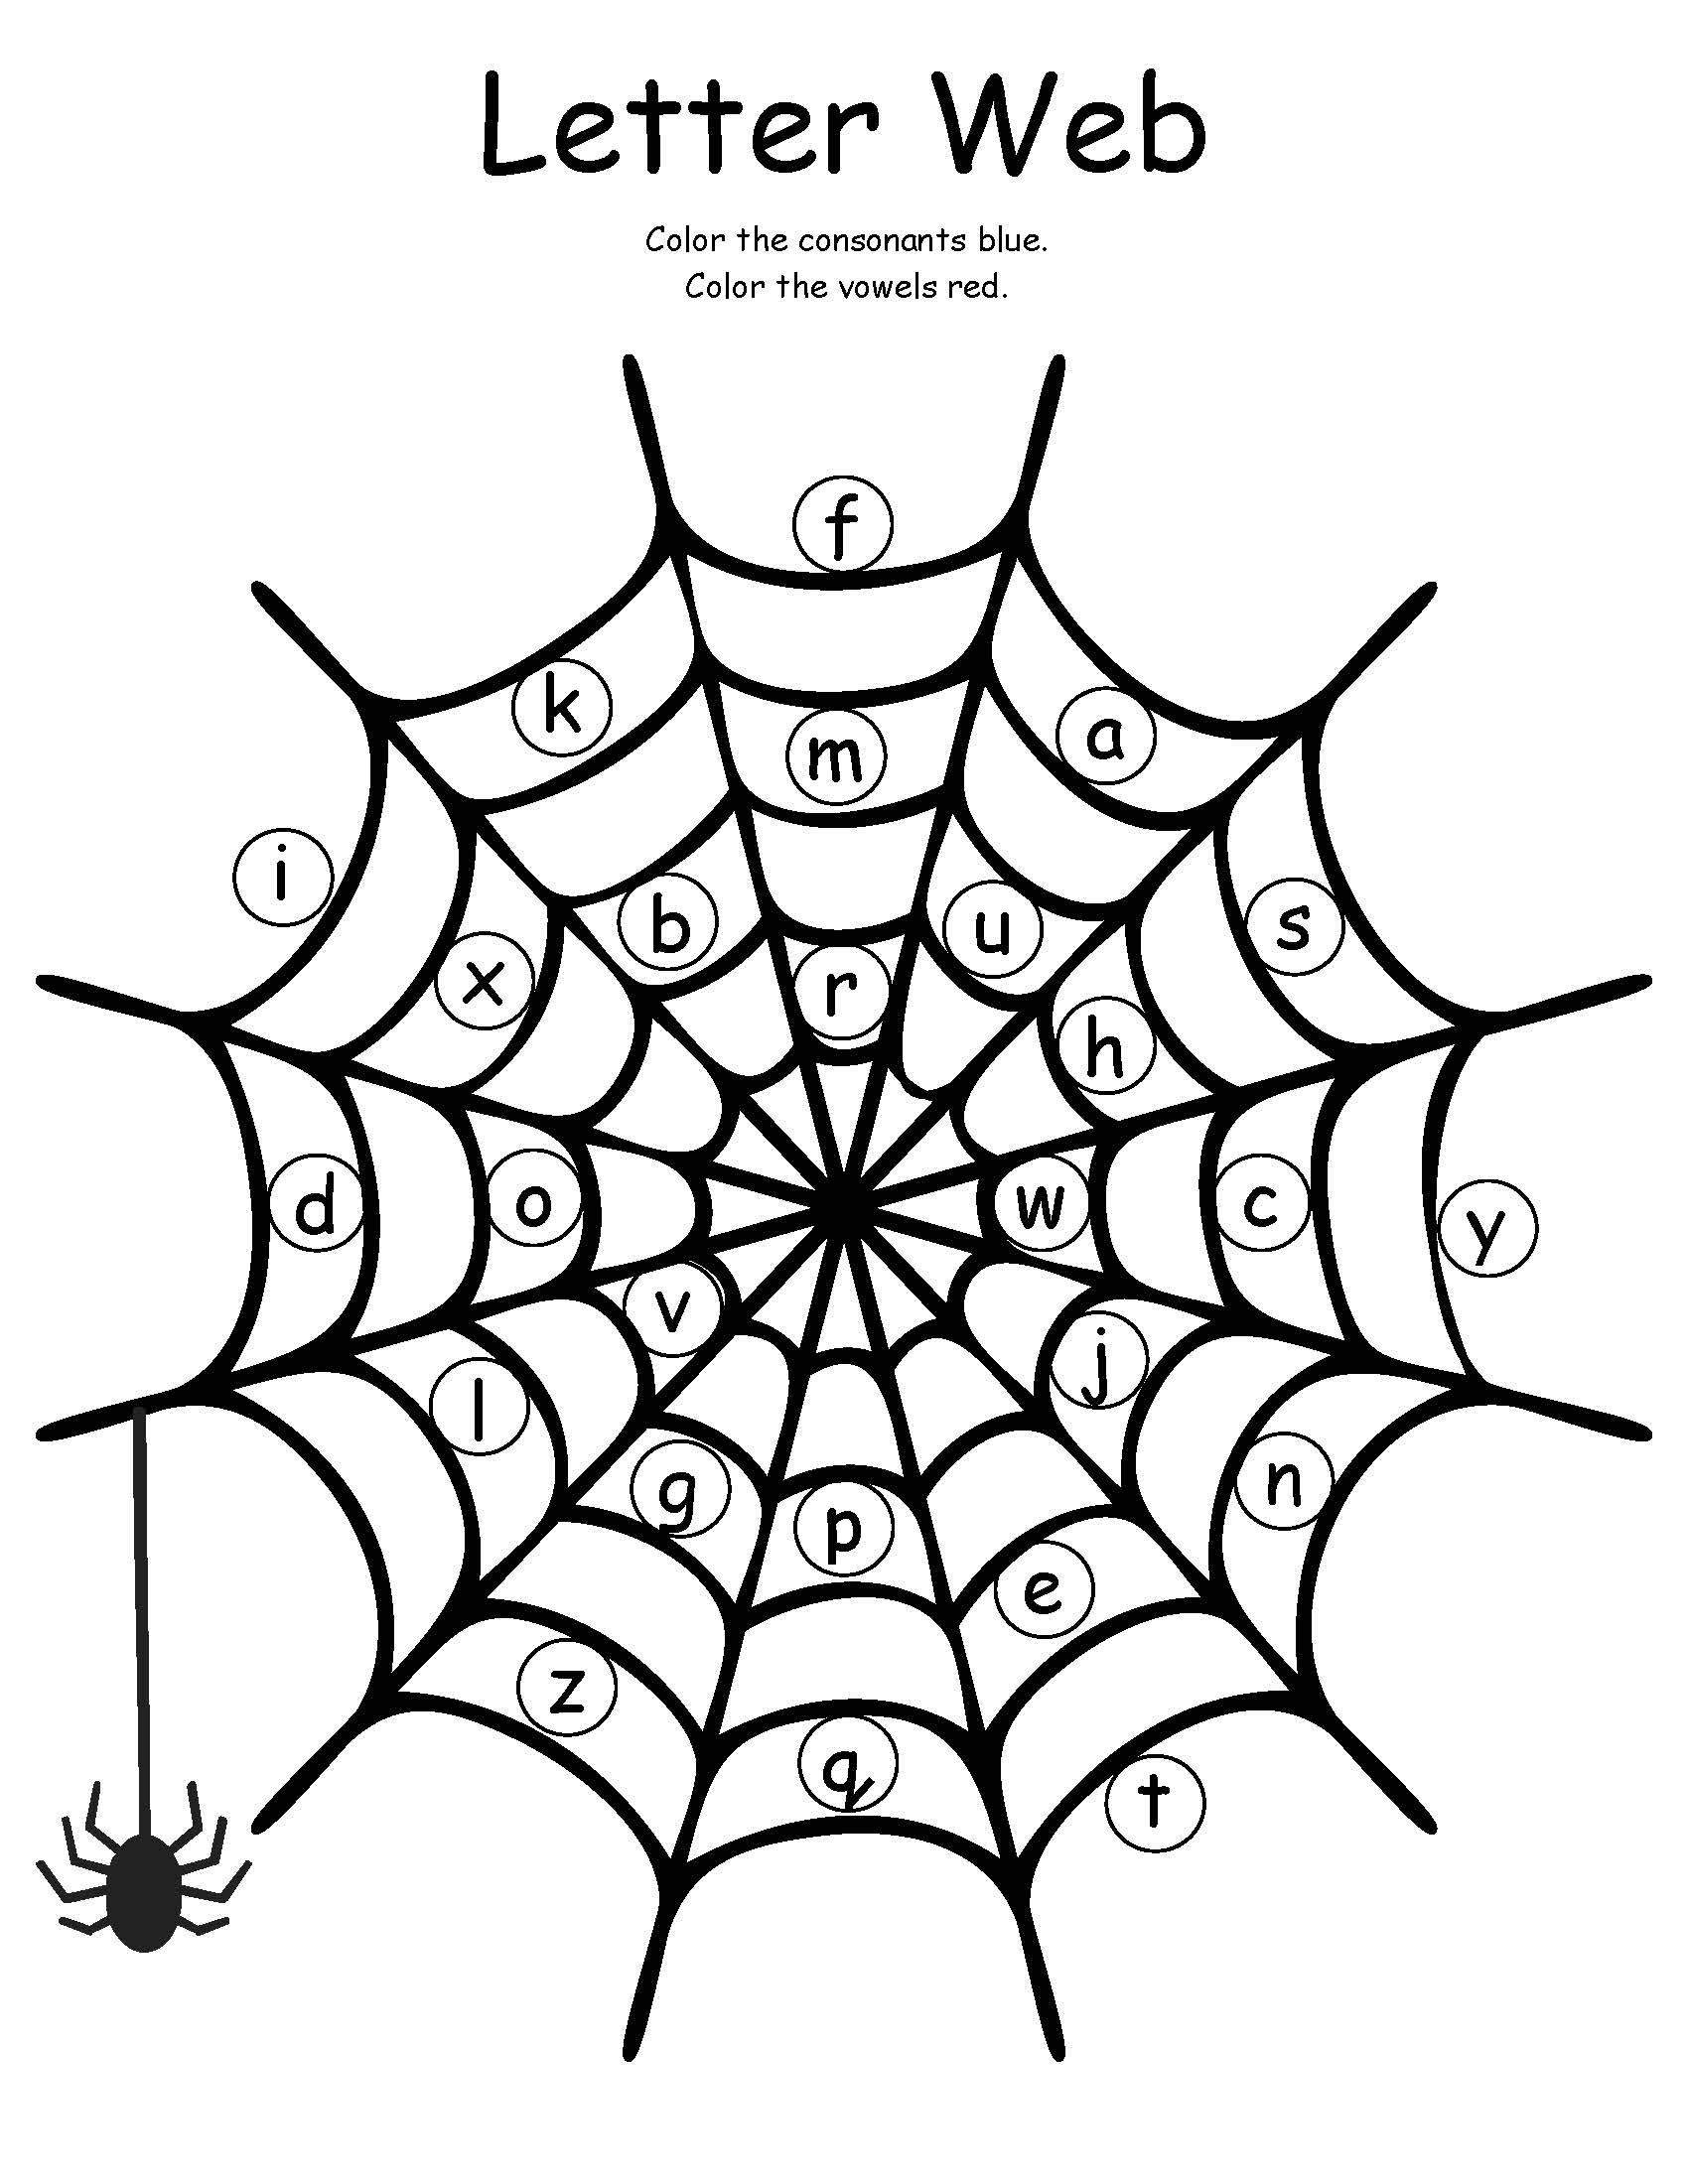 Letter Web Literacy Game